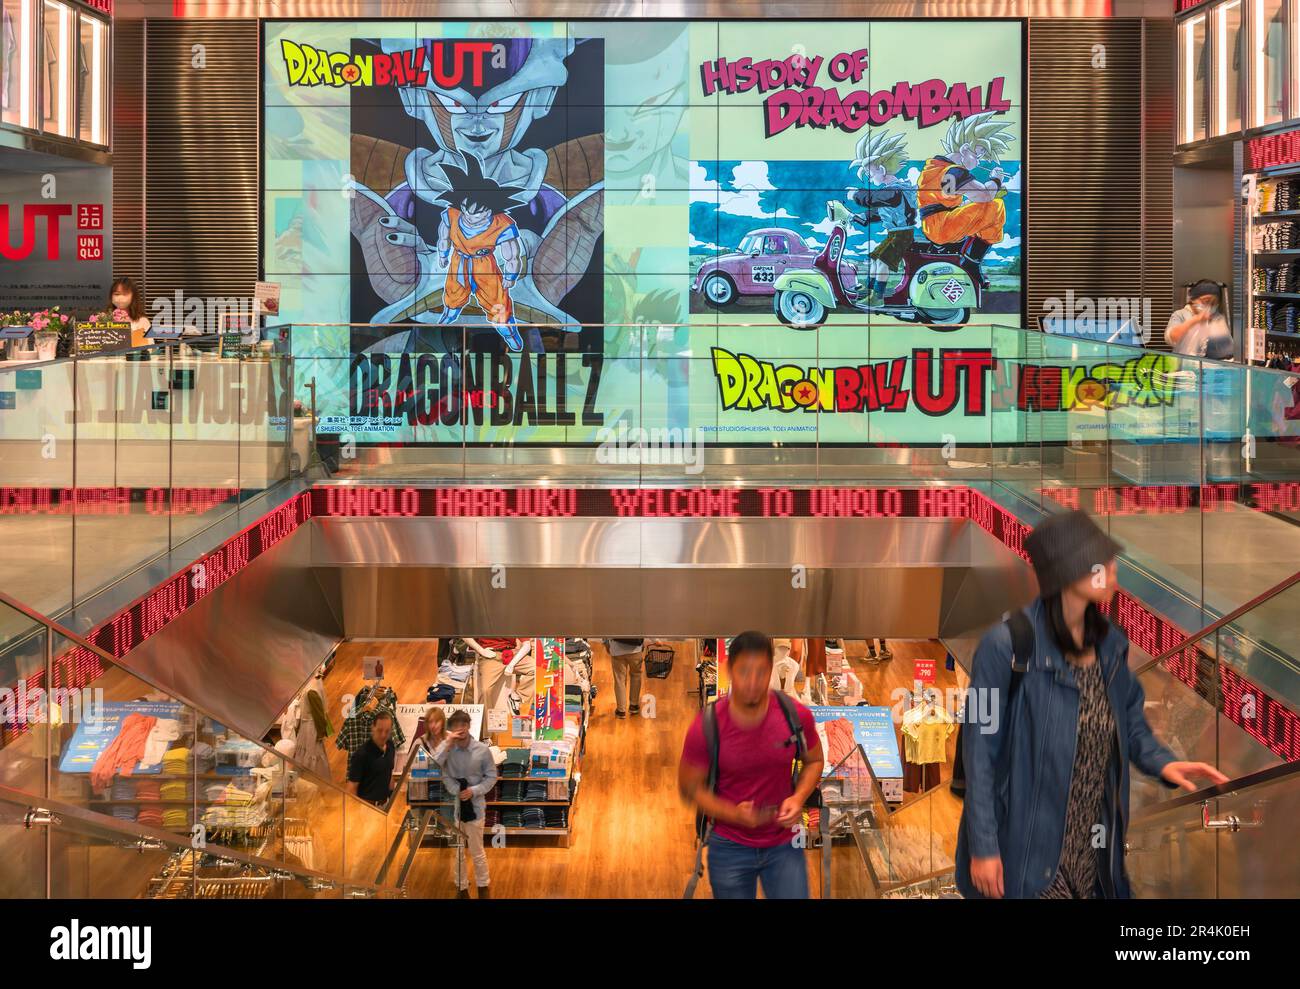 tokyo, harajuku - may 10 2023: Interior view of a Japanese Uniqlo store with a wall covered in large screen advertising artwork featuring the popular Stock Photo